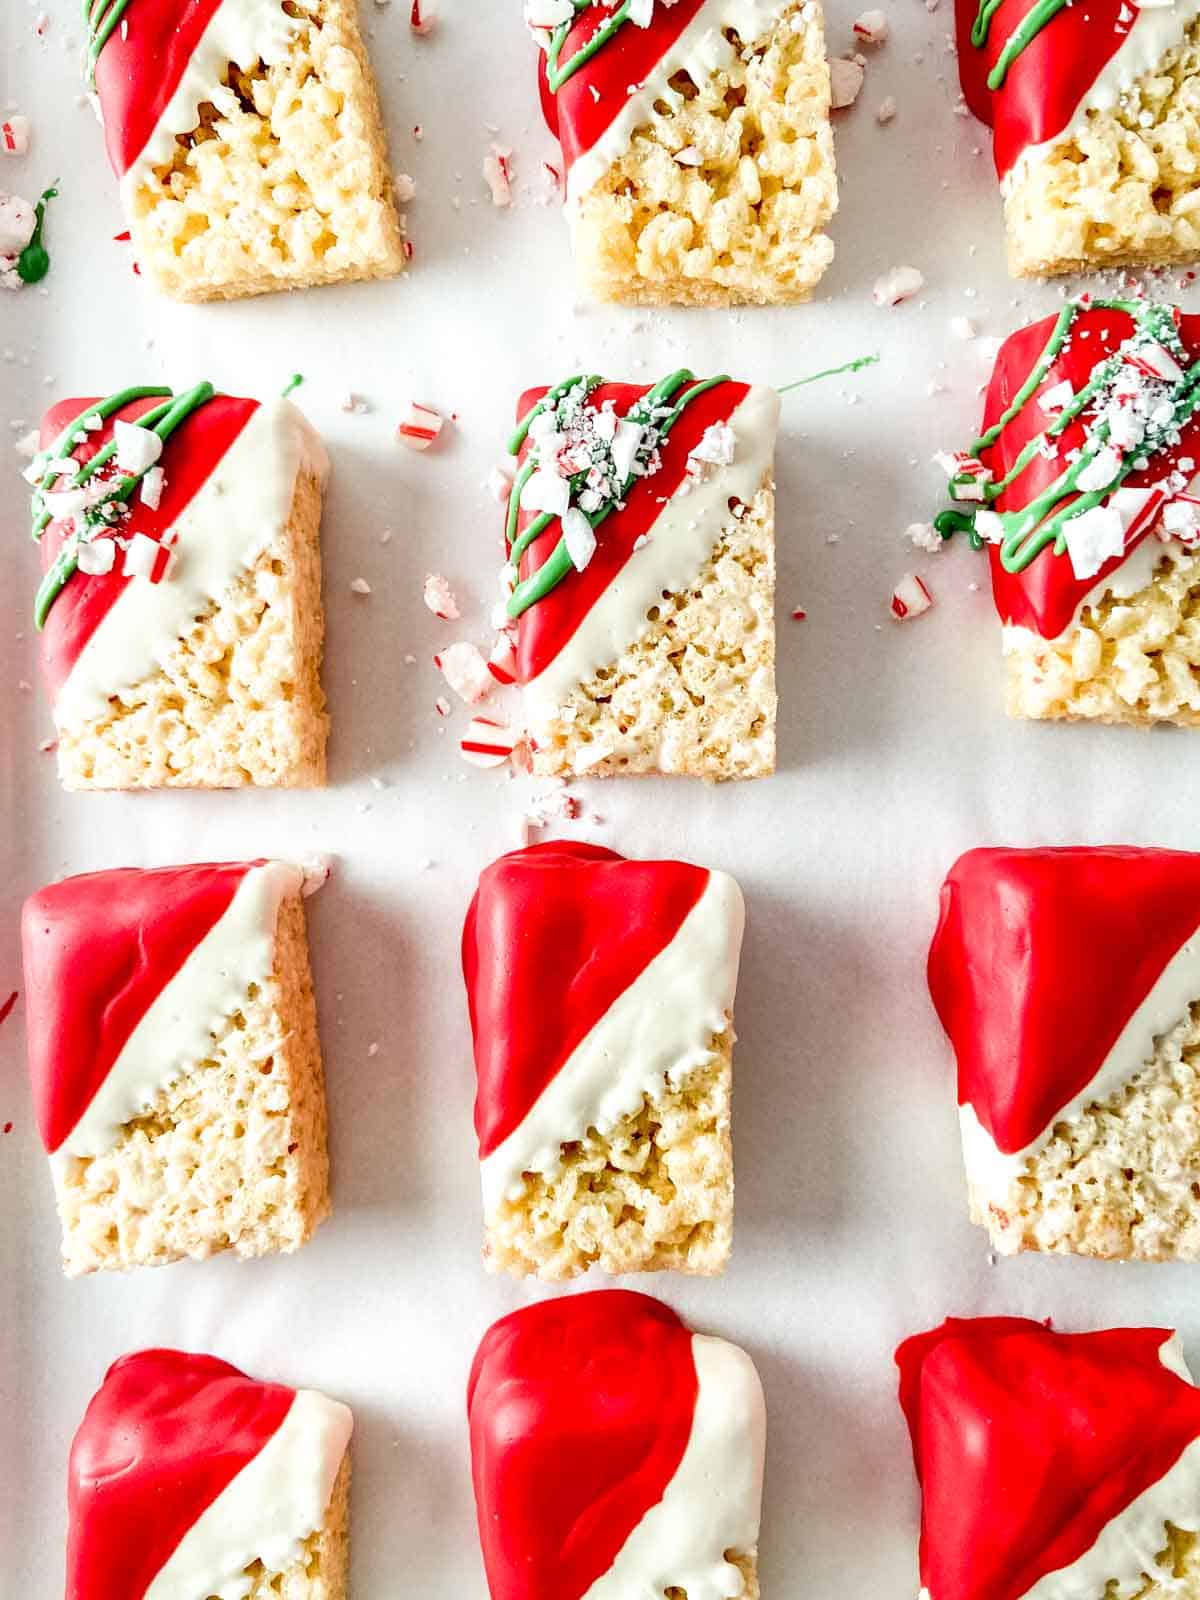 Rice cereal treats decorated with red and green chocolate and candy canes on a baking sheet.